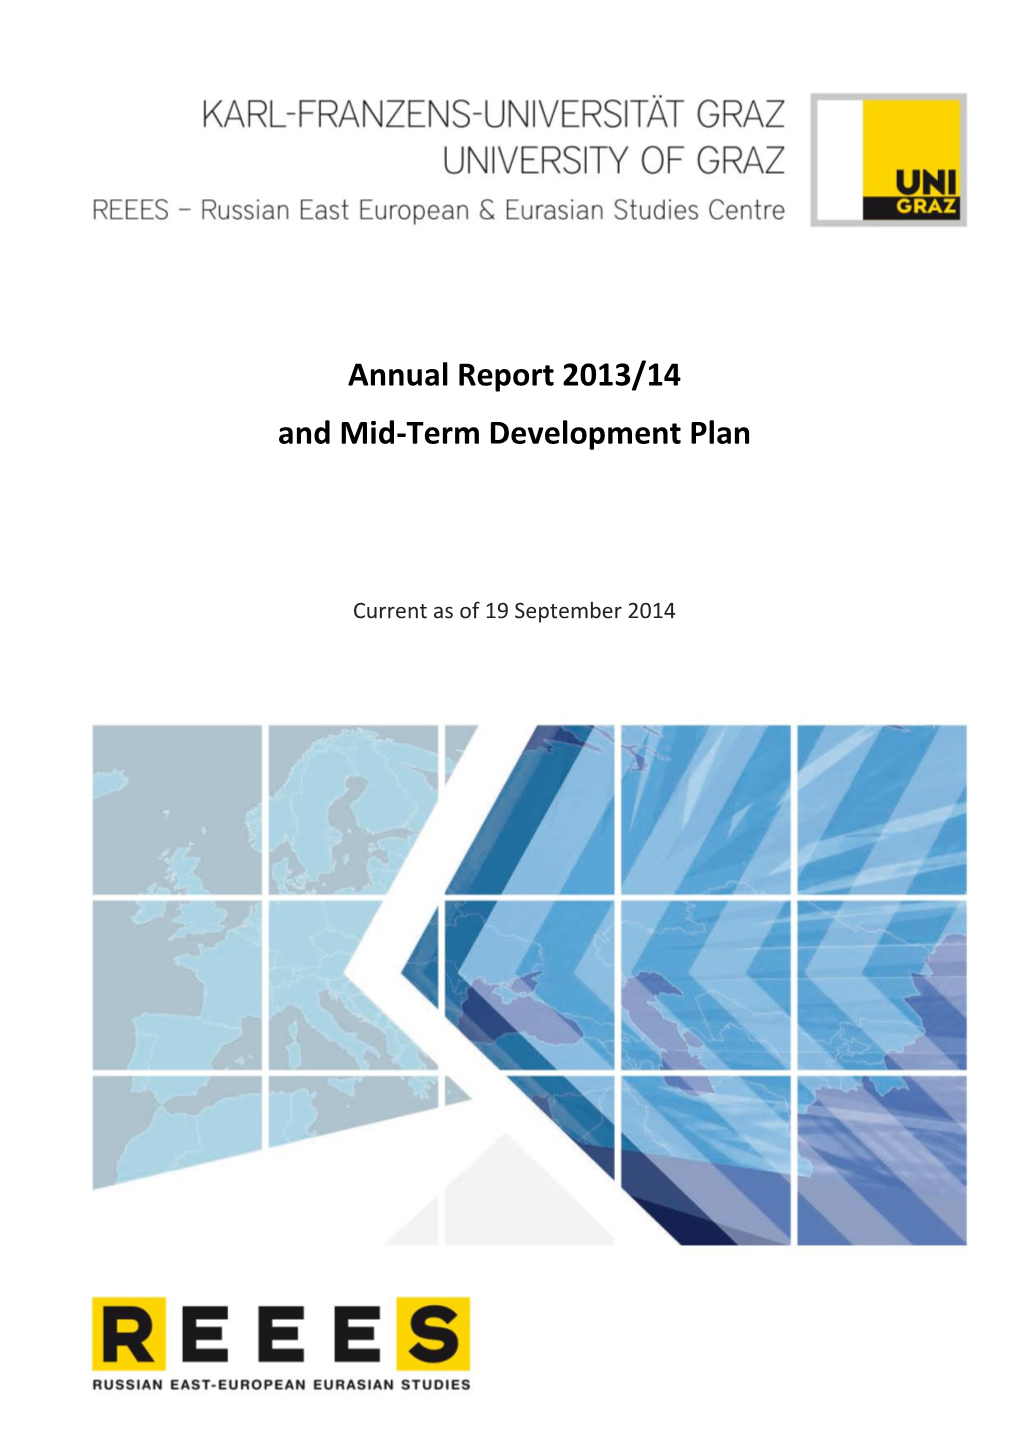 Annual Report 2013/14 and Mid-Term Development Plan